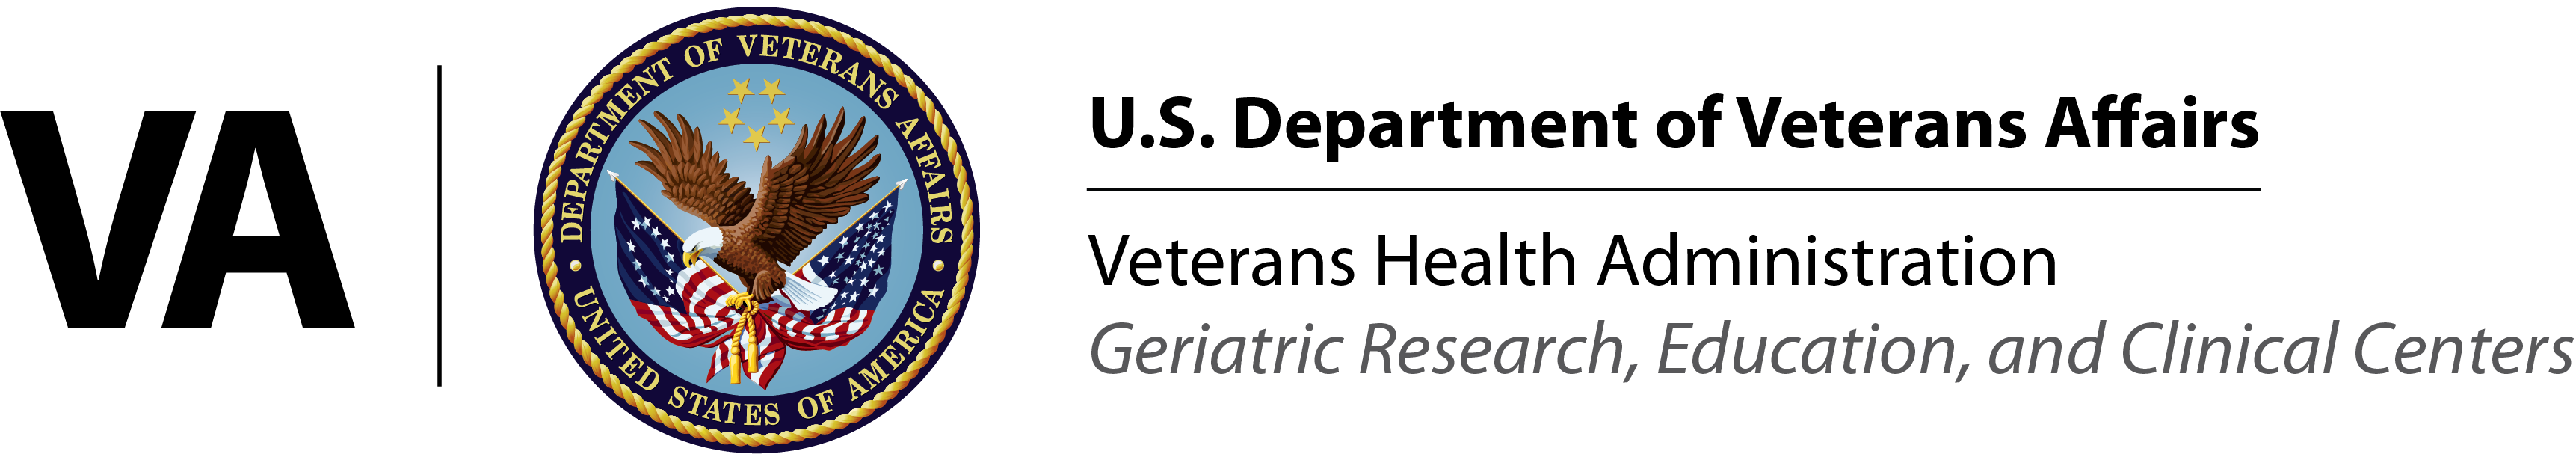 VA Geriatric Research, Education, and Clinical Centers